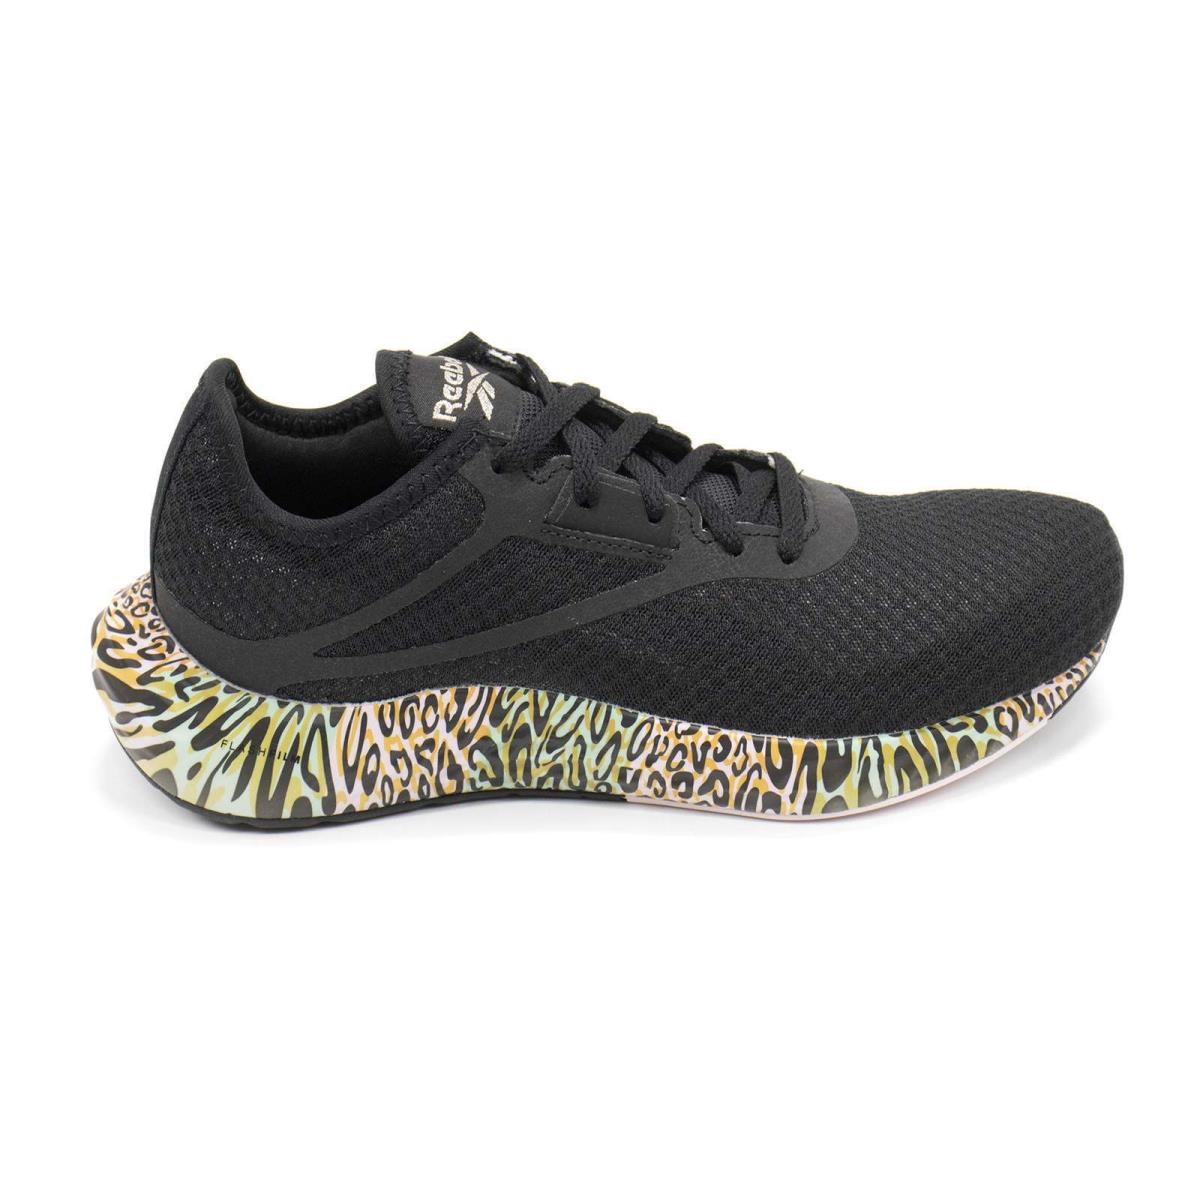 Reebok Womens Athletic Shoes Flashfilm 3 Lace-up Running Low-top Sneakers